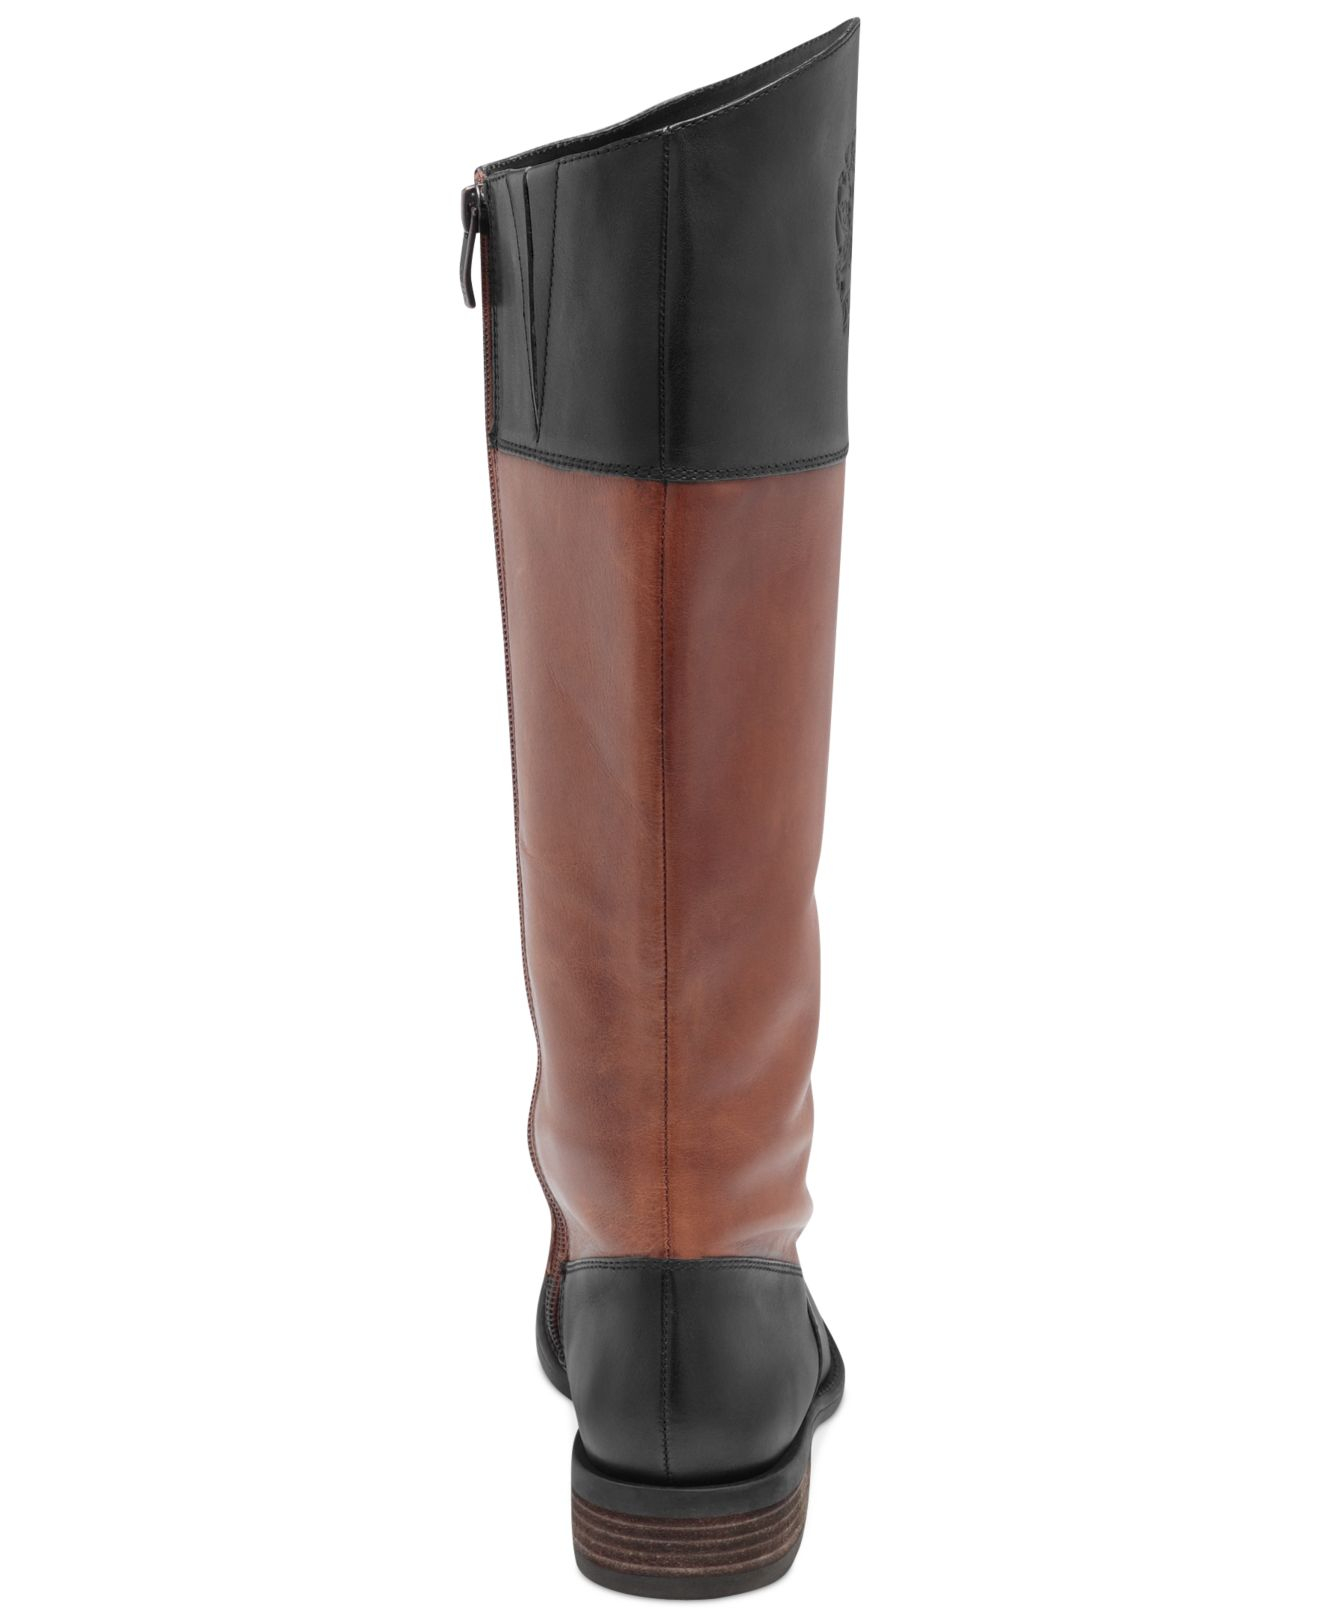 Vince Camuto Kellini Tall Riding Boots in Black - Lyst